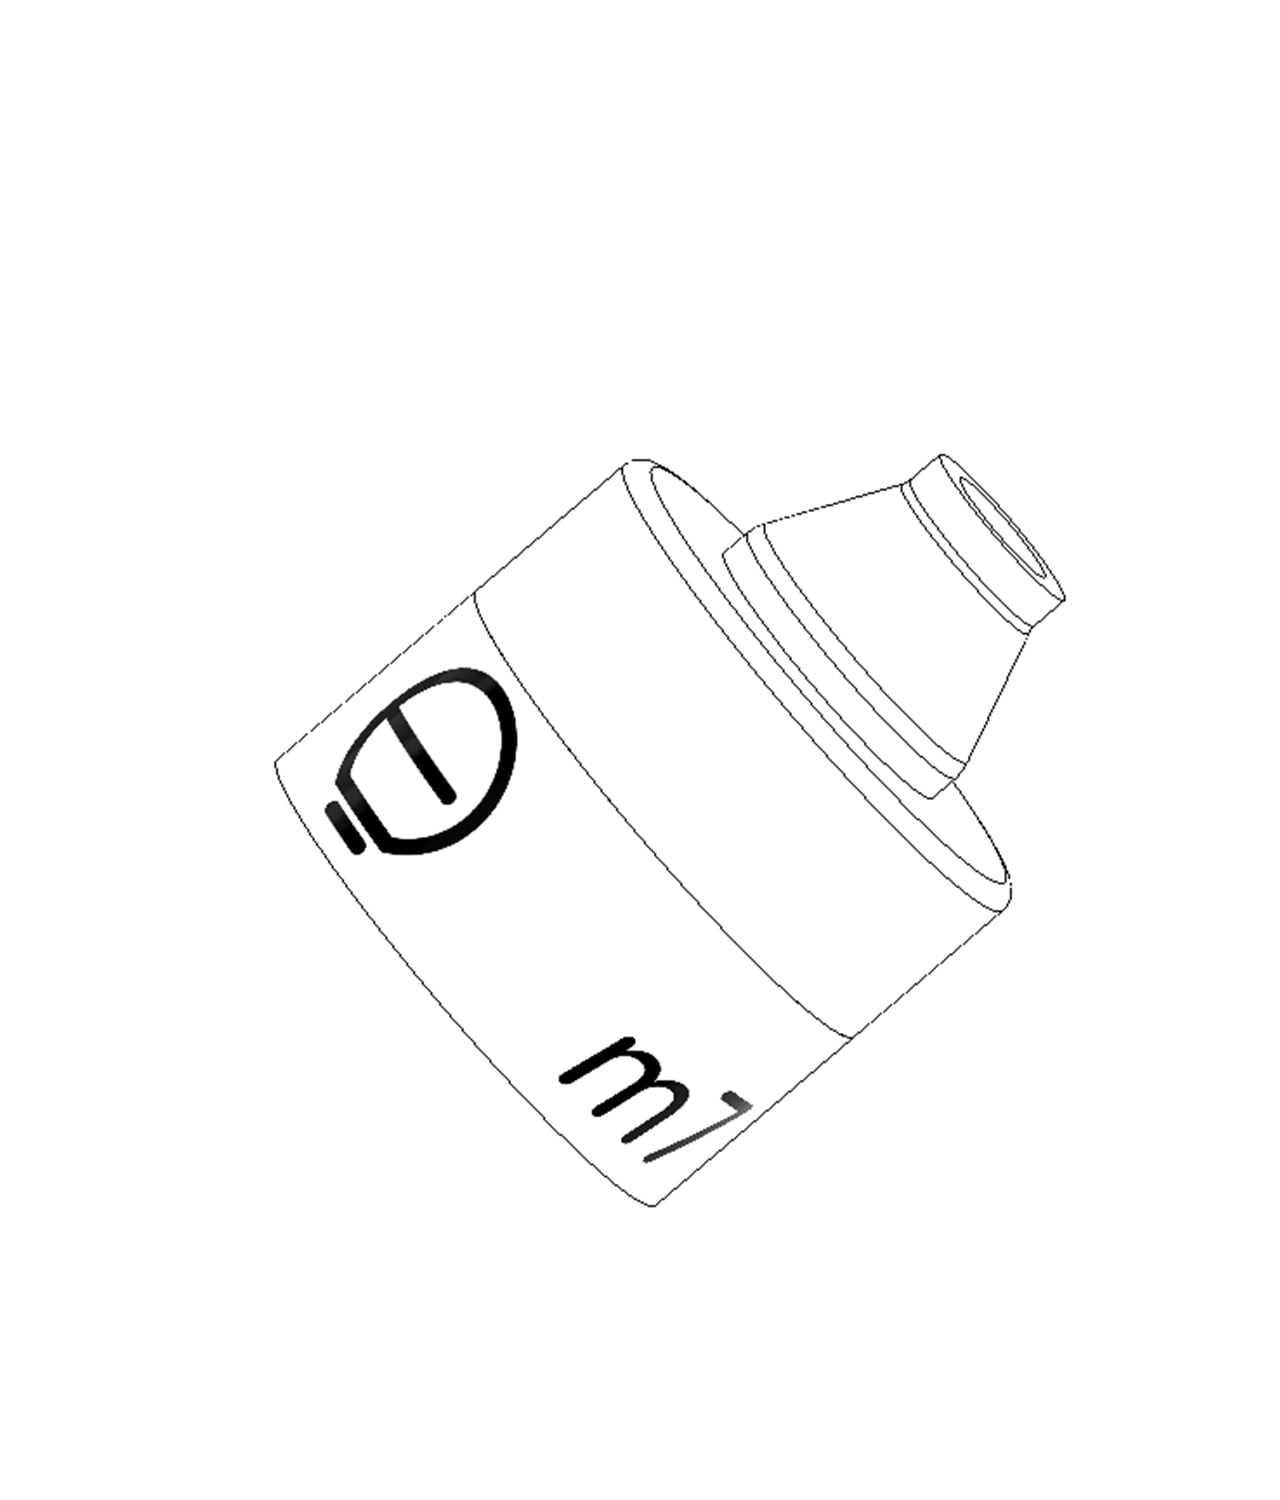 miemi assembly drawing